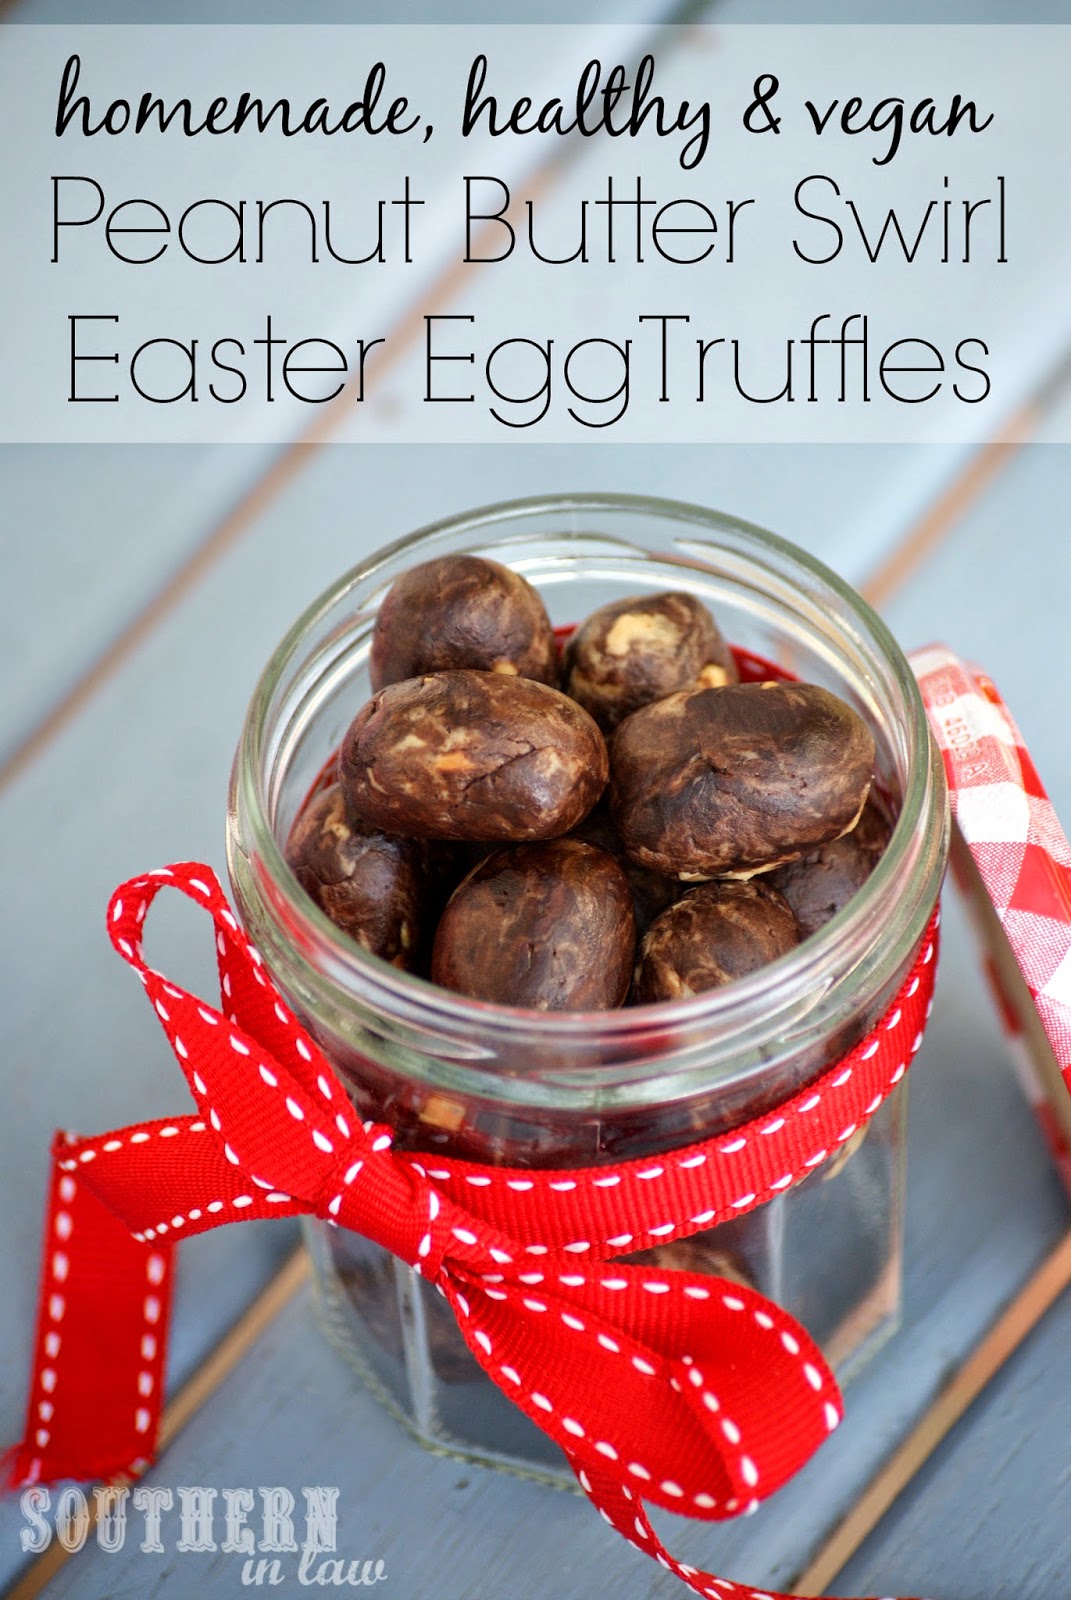 Healthy Homemade Peanut Butter Easter Eggs Recipe - Gluten free, low fat, sugar free, clean eating friendly, healthy easter recipes